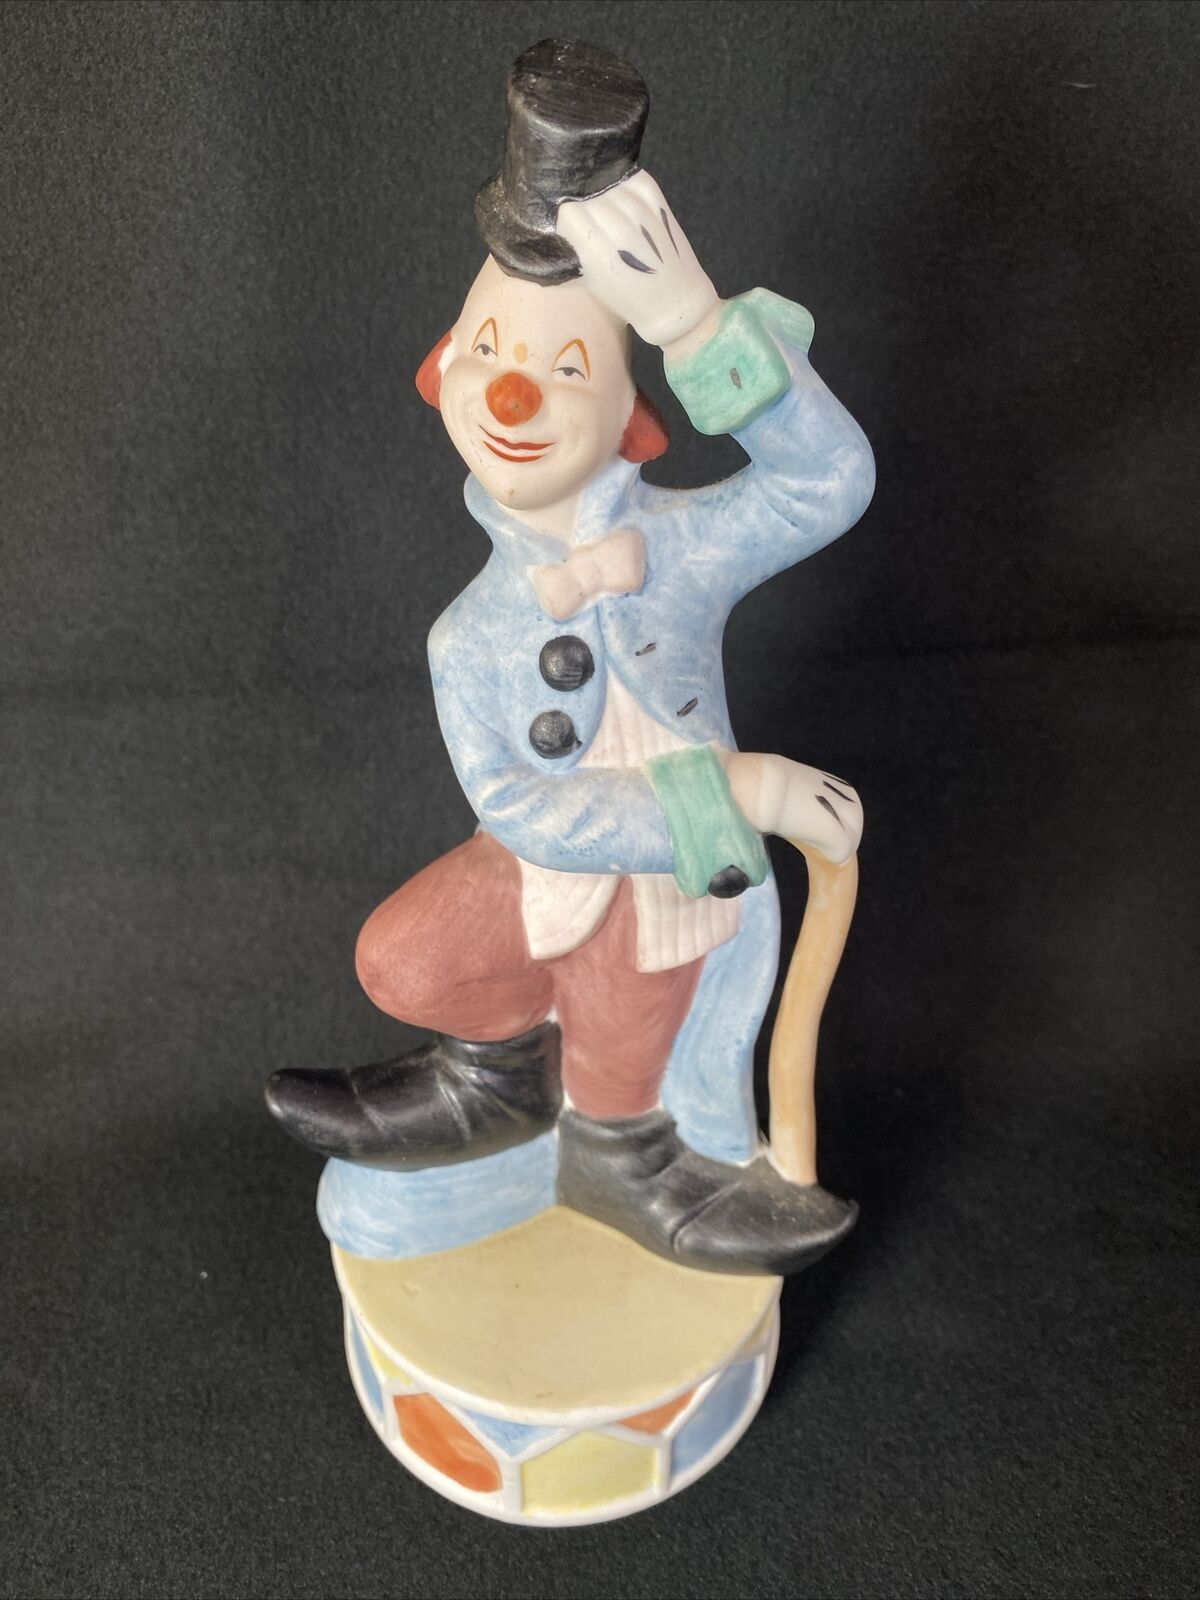 Vintage Clown Figurine In Tux & Top Hat Music Box on Circus Drum Made in Tiawan